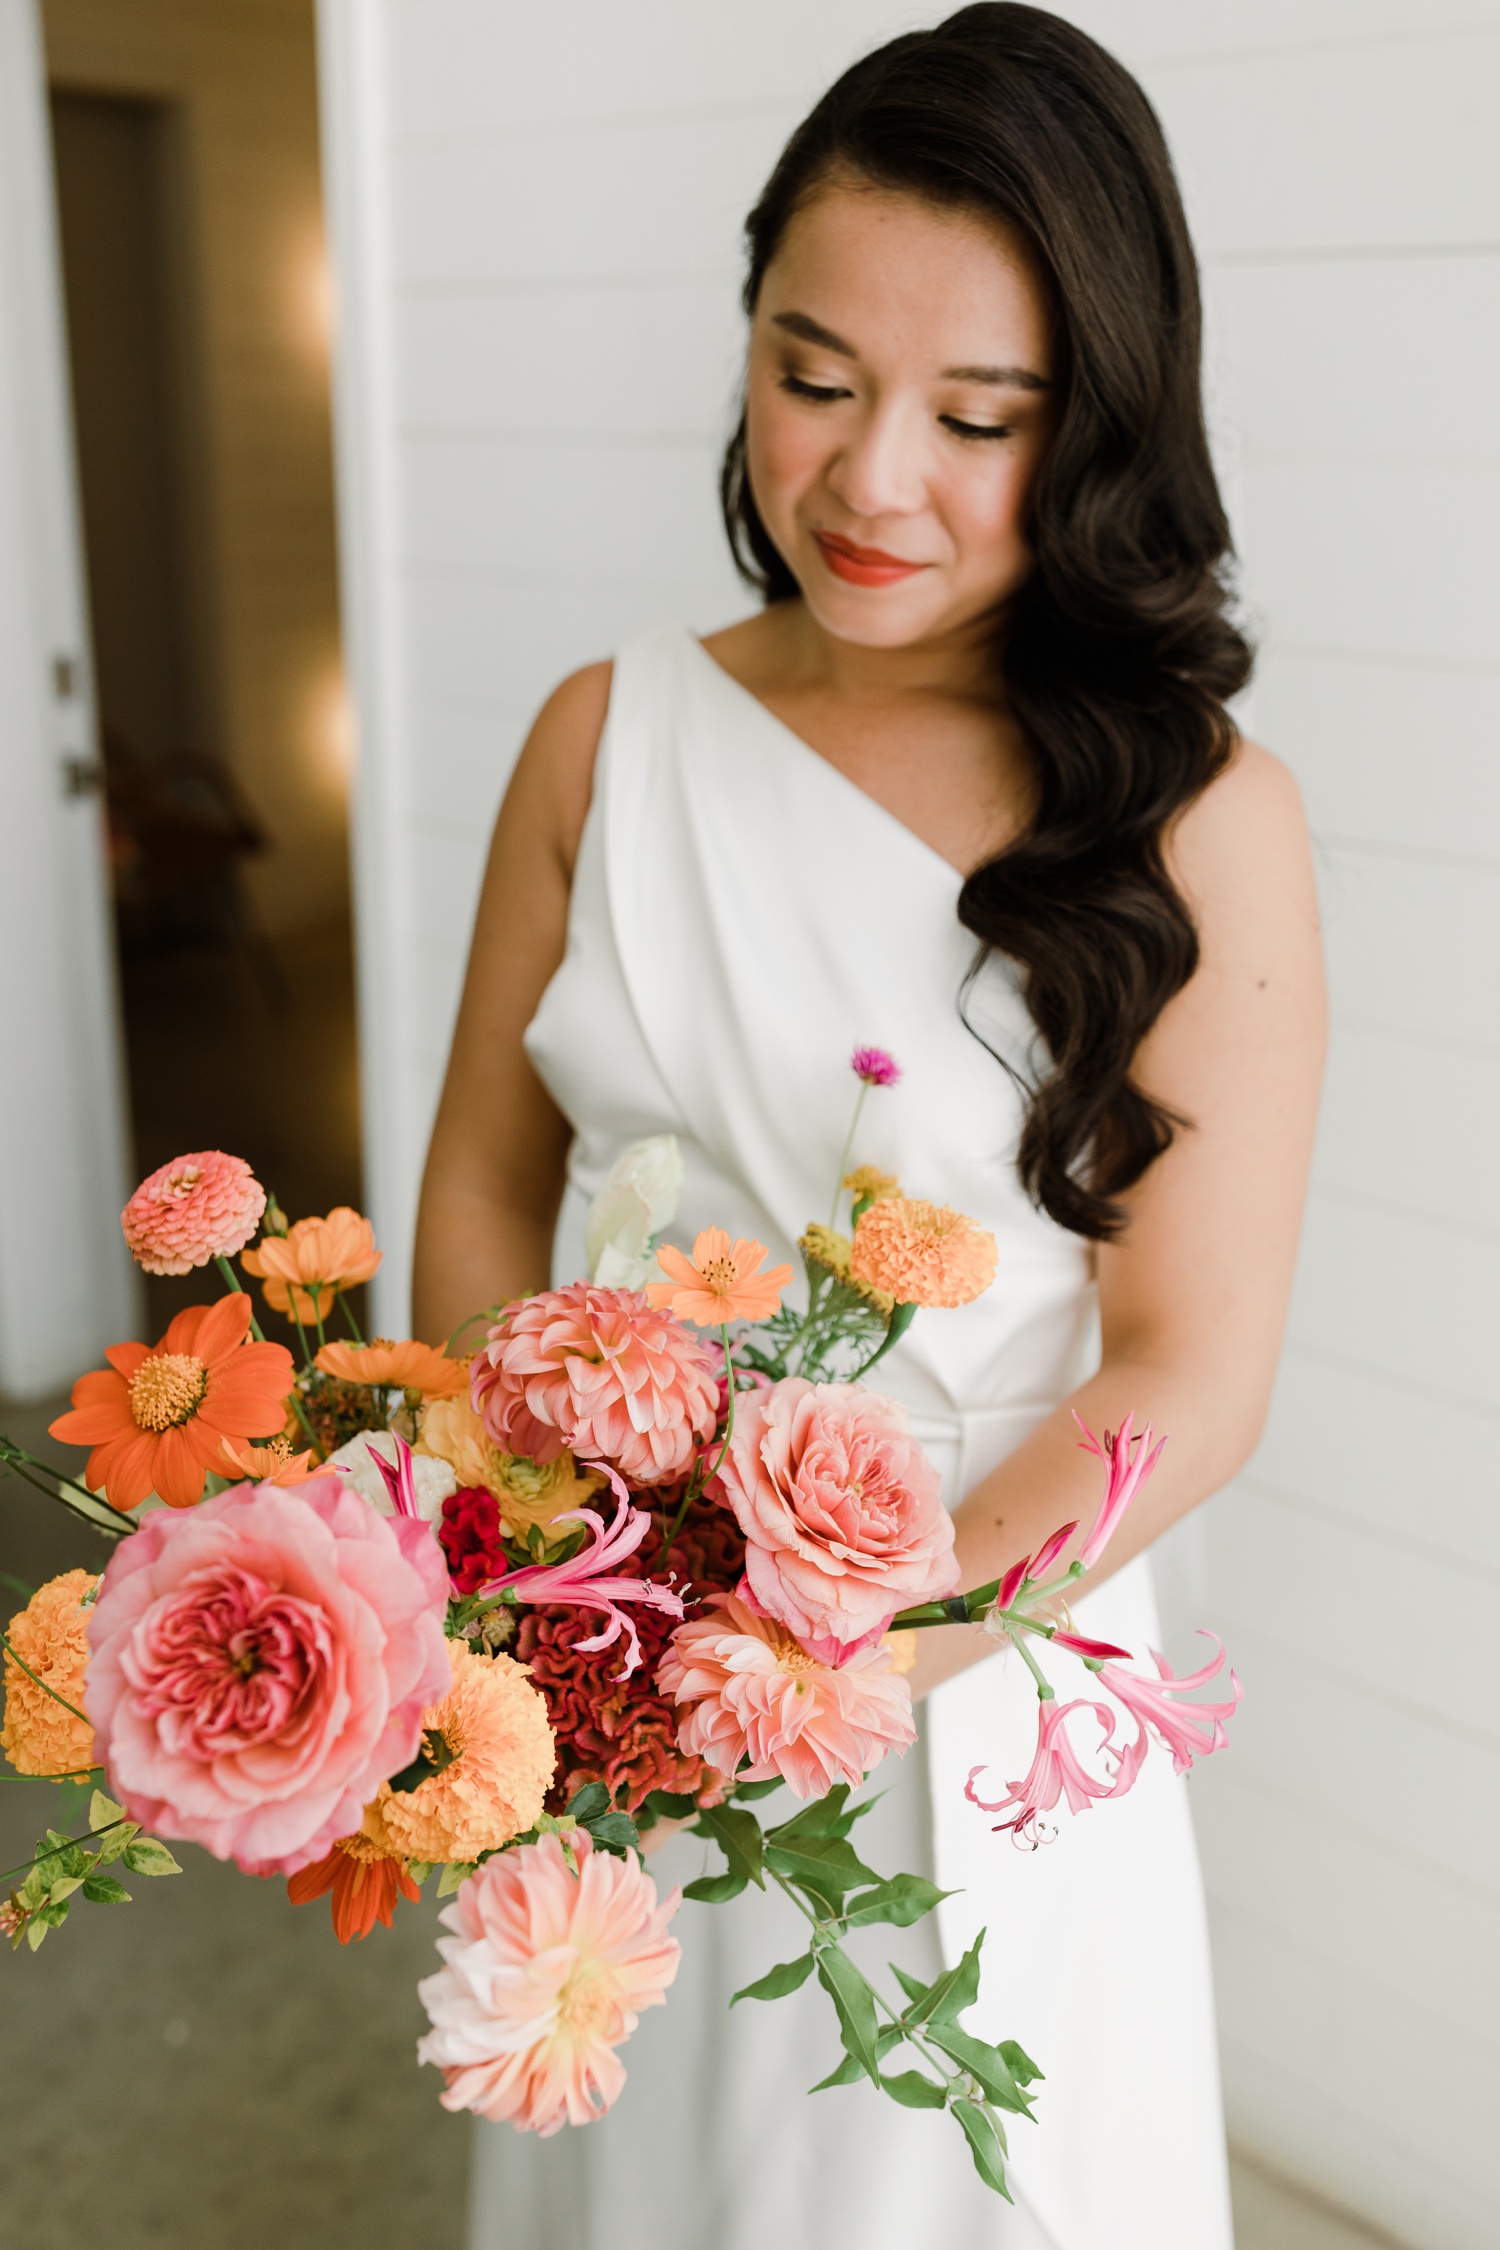 Pink and orange wedding bouquet with dahlias, zinnias, and garden roses by Mountain Laurel Floral